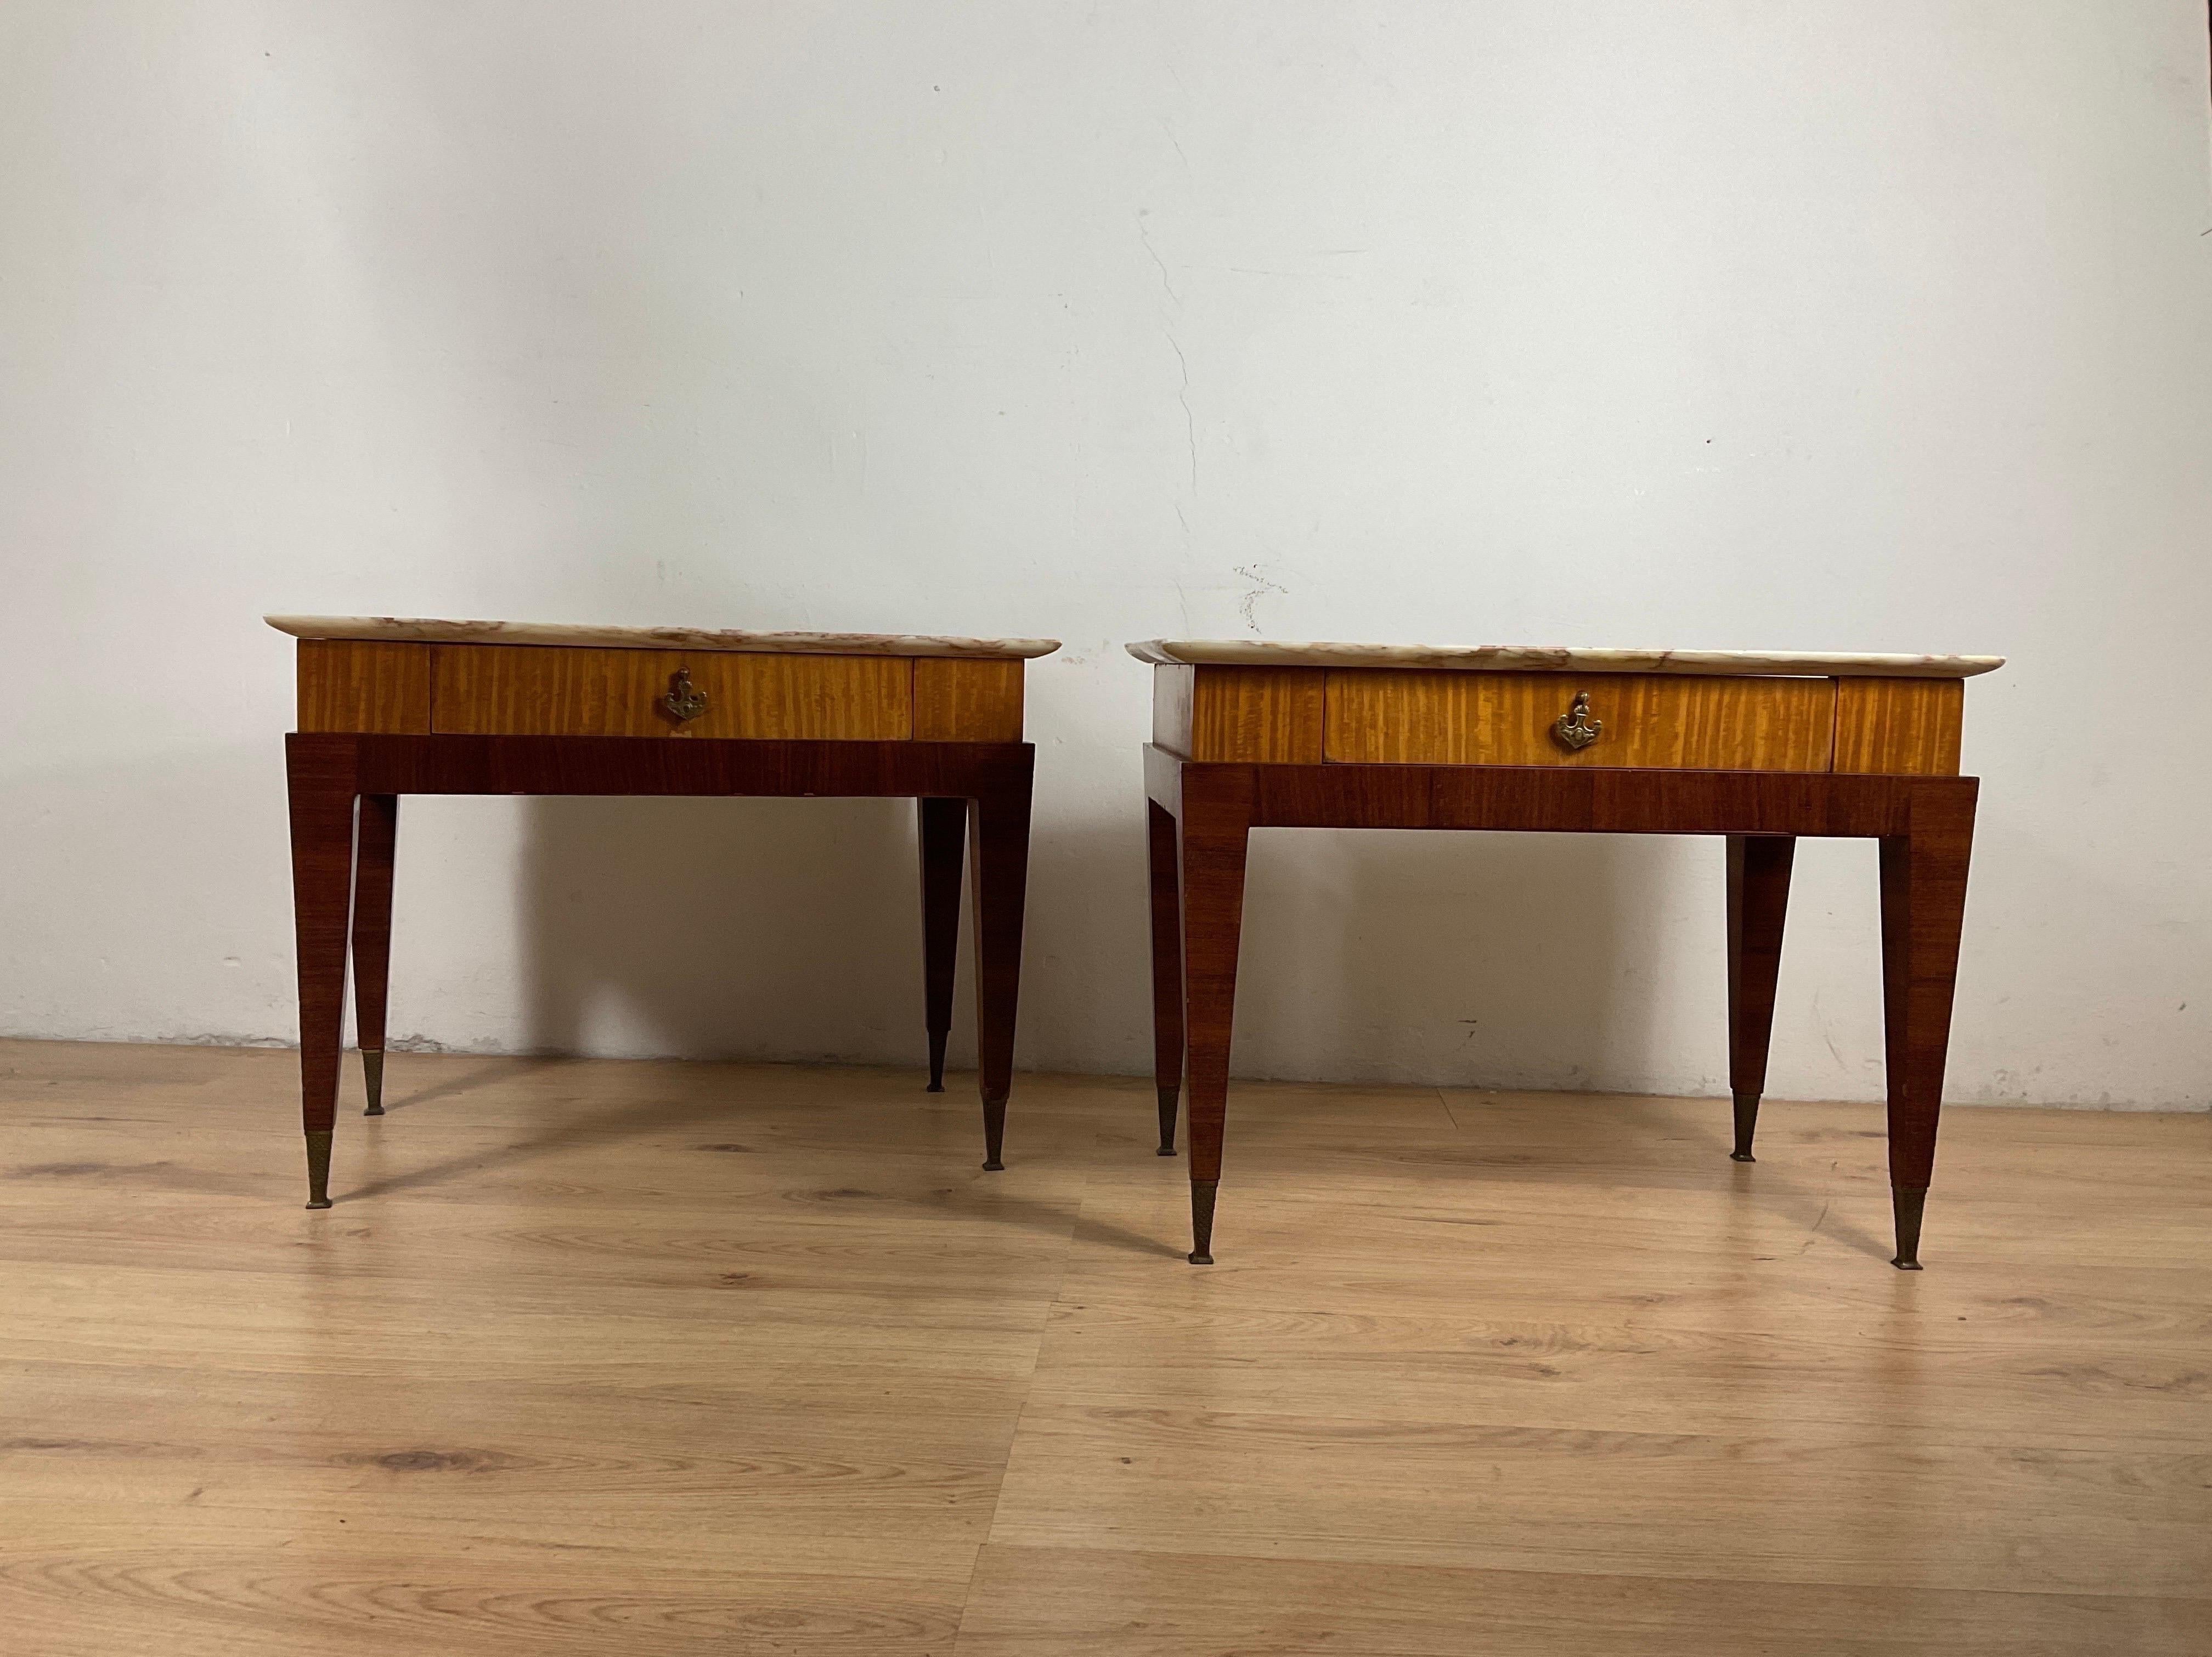 A pair of dogwood bedside tables with brass tips, marble top attributable to the famous Italian designer Paolo Buffa of the 1950s